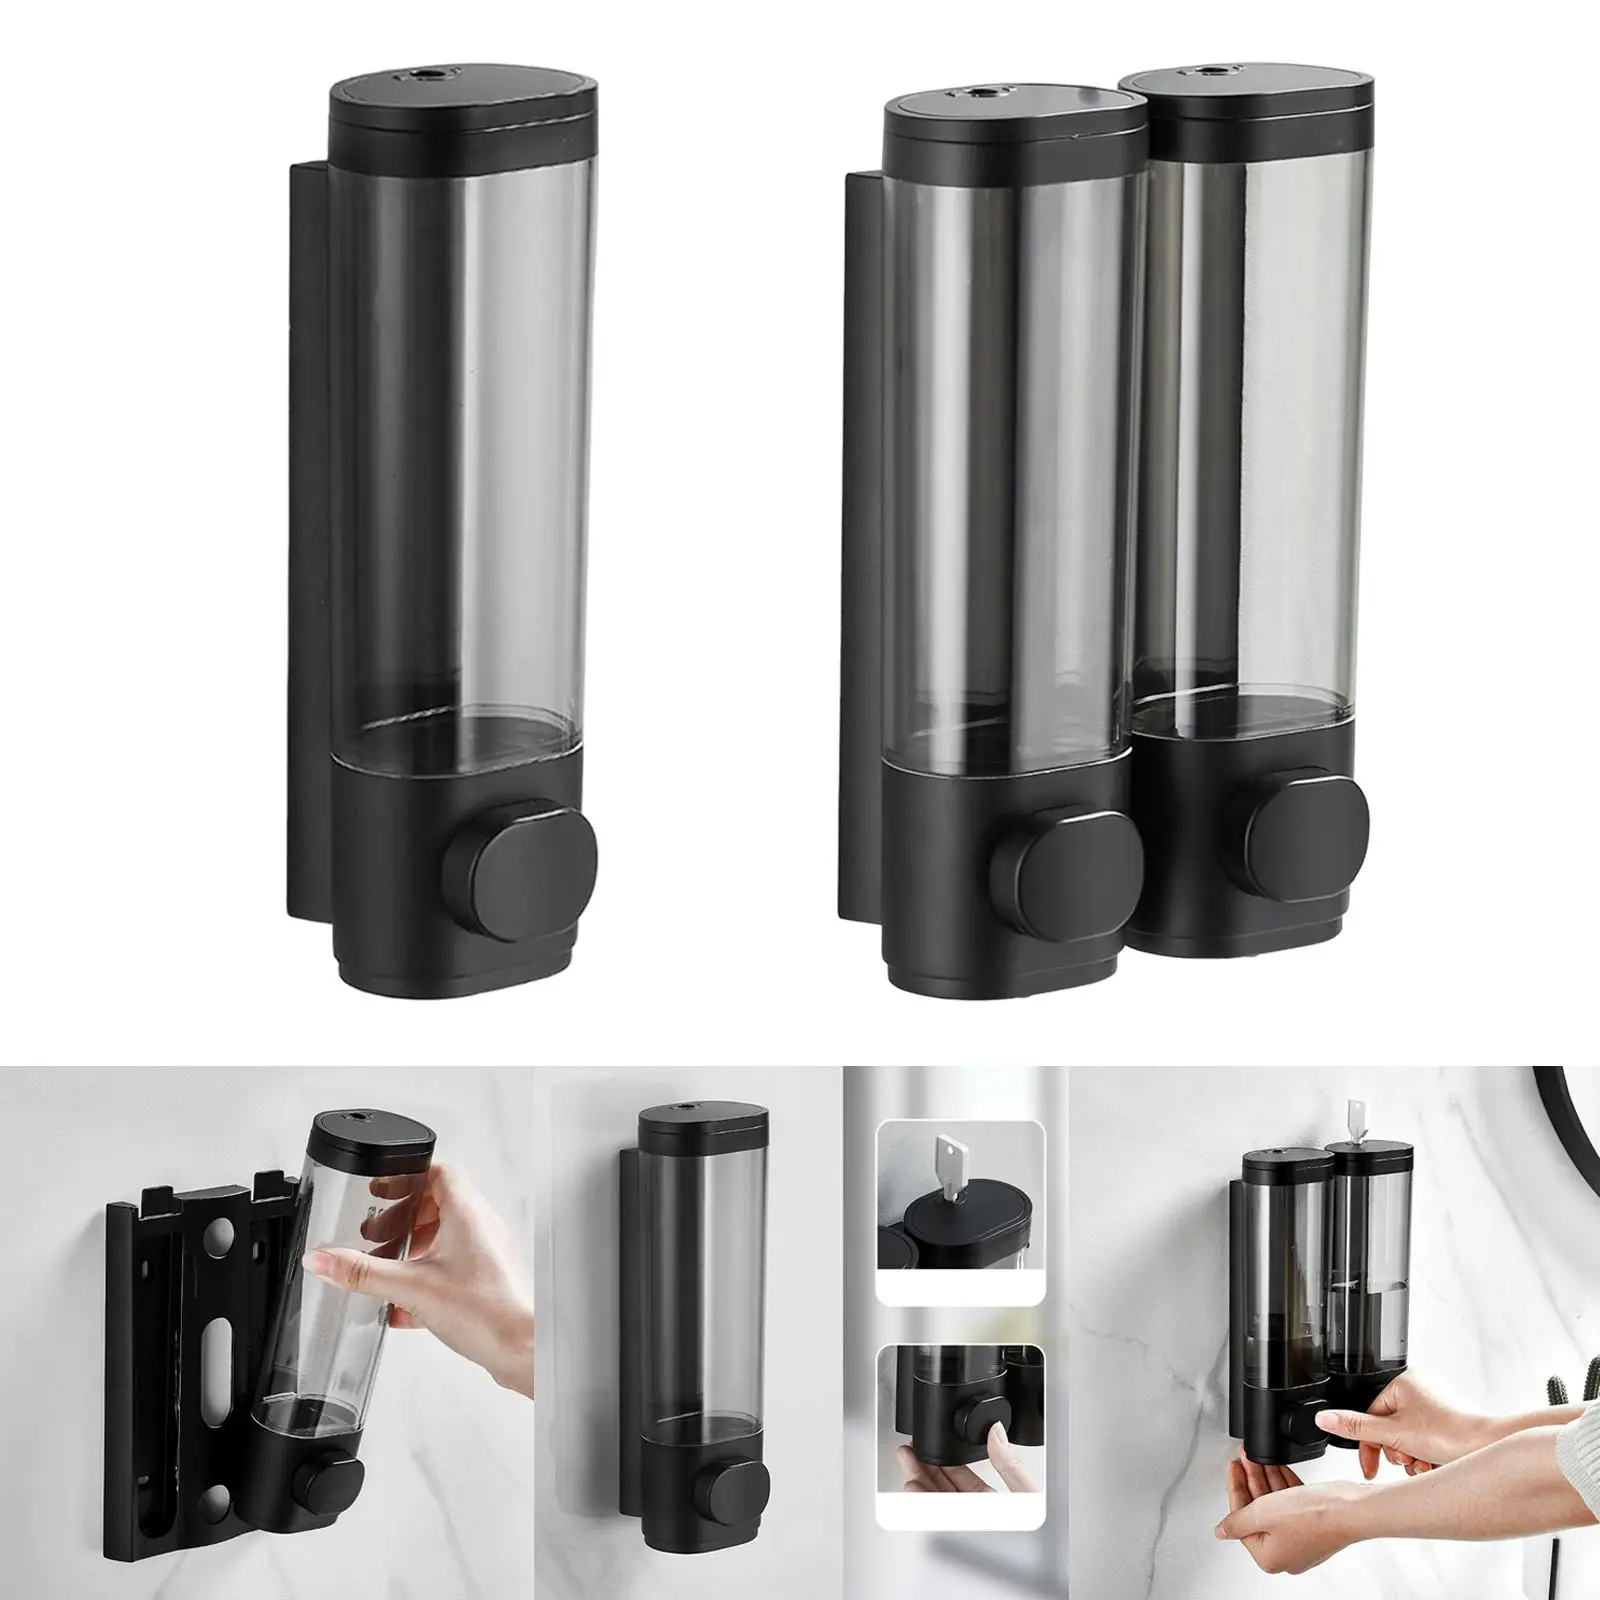 Manual Soap Dispenser 350ml Large Capacity Shampoo Container Shower Dispensers for Office Bathroom Kitchen Restaurant Hotel